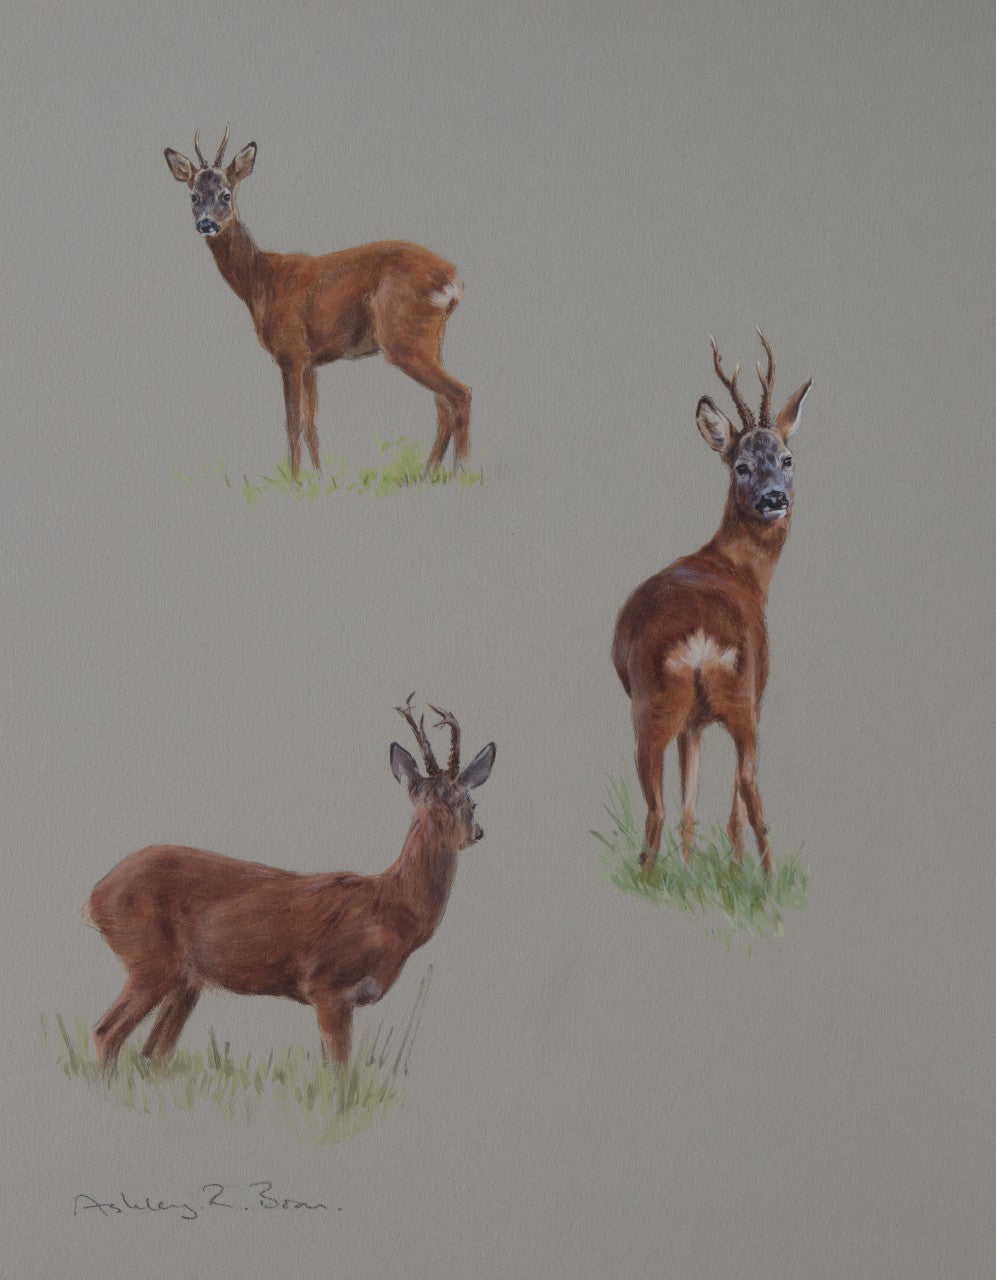 022. 'Three Roe Buck Studies' Limited Edition Print (100 only) by Ashley Boon - 13.75" x 11.5"